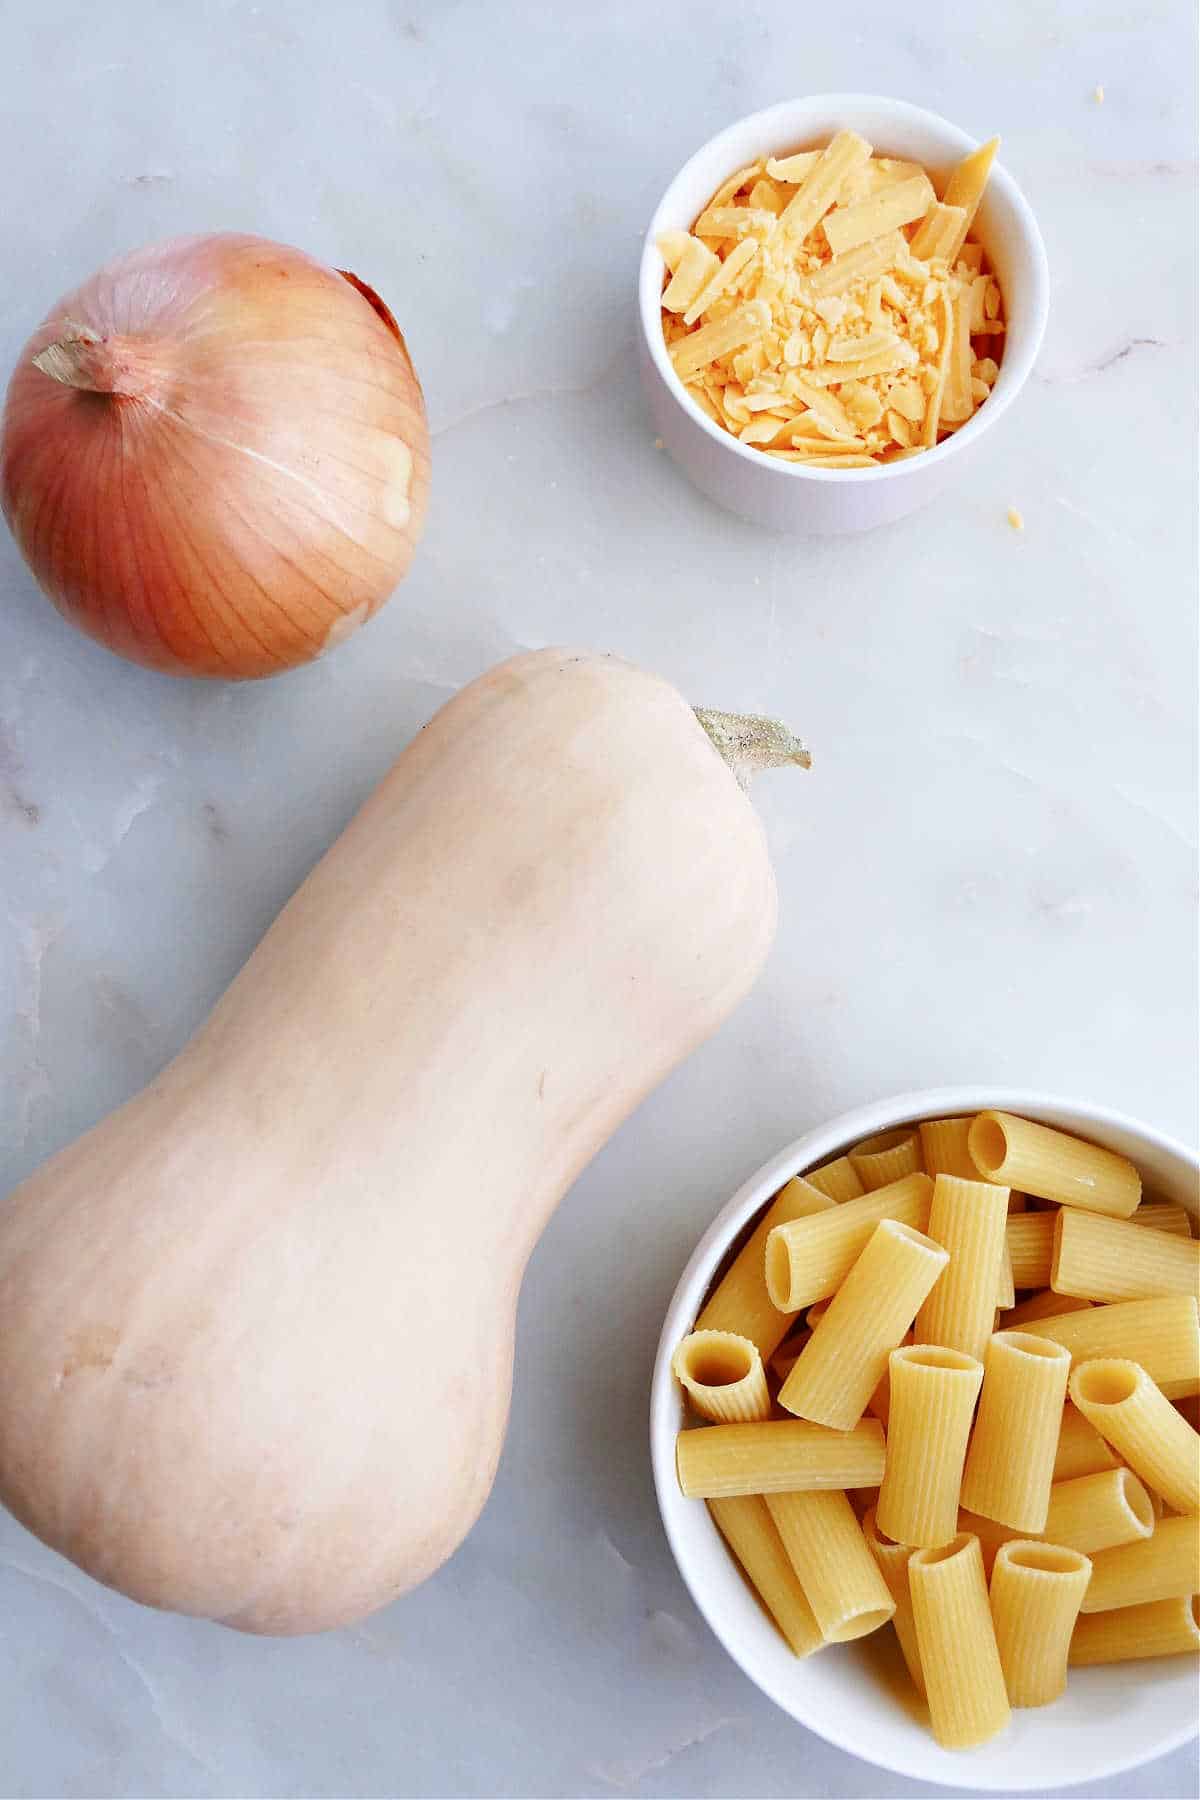 onion, butternut squash, shredded cheese, and rigatoni pasta on a counter next to each other